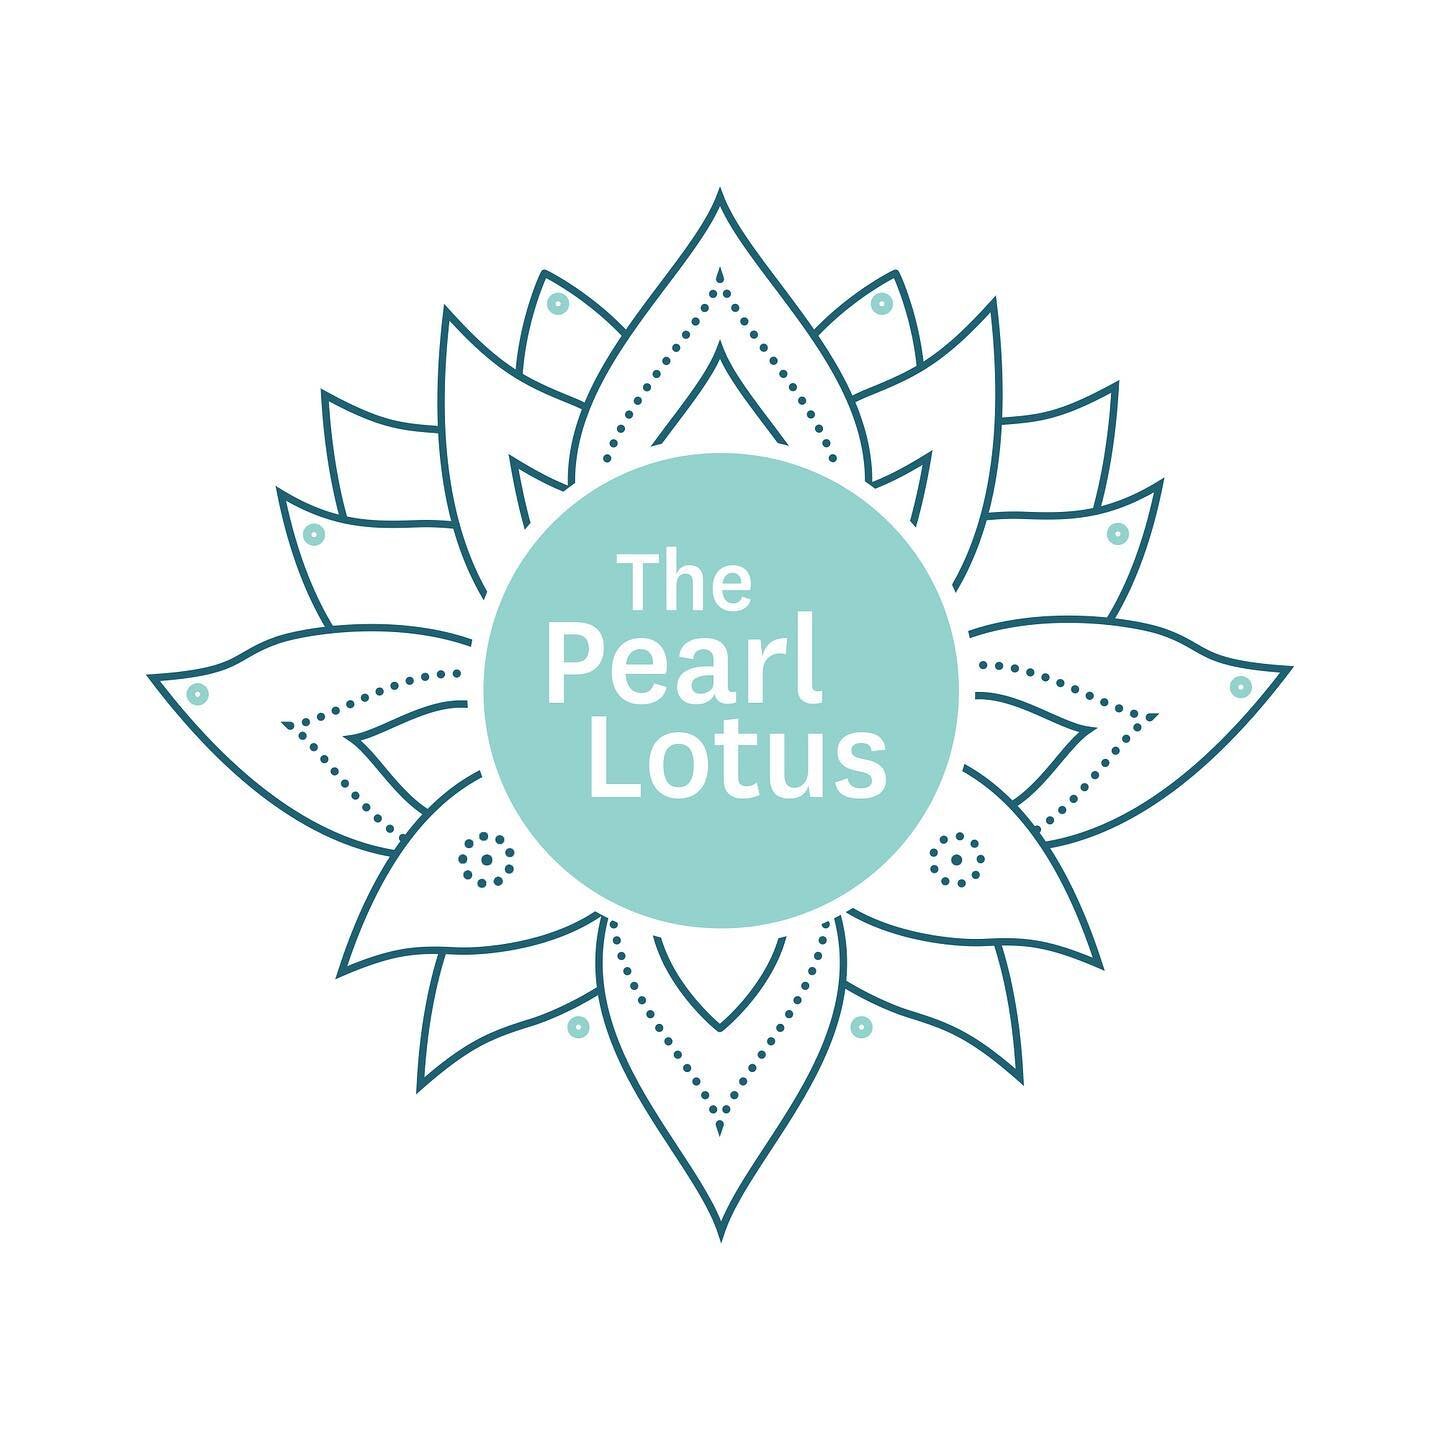 A new logo designed for @louise_l_hayes - clinical psychologist, academic, author, trainer and speaker. The pearl Lotus - mindful adventures in Nepal and charitable work. 
.
.
.
.
.
.
#logodesigner #logodesigns #lotuslogo #wonderbirdnz #psychology #c